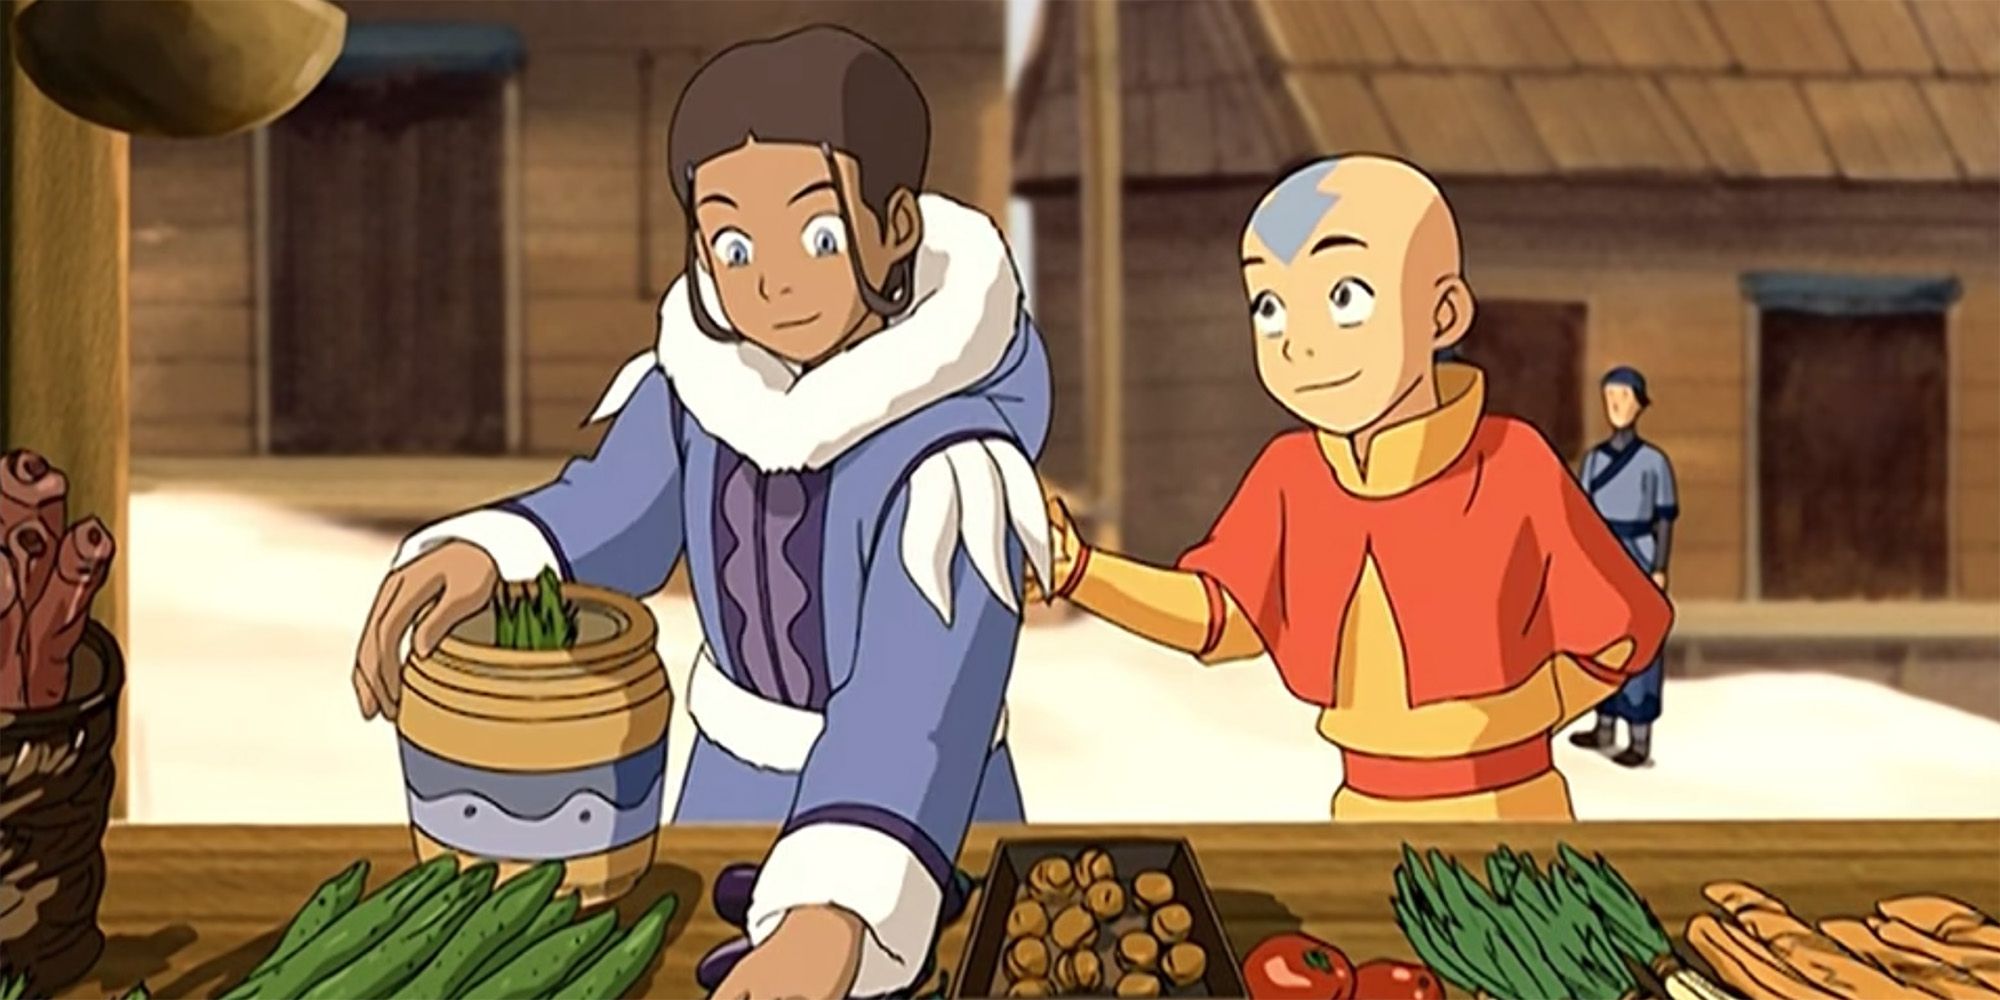 Katara and Aang in the market in Avatar: The Last Airbender